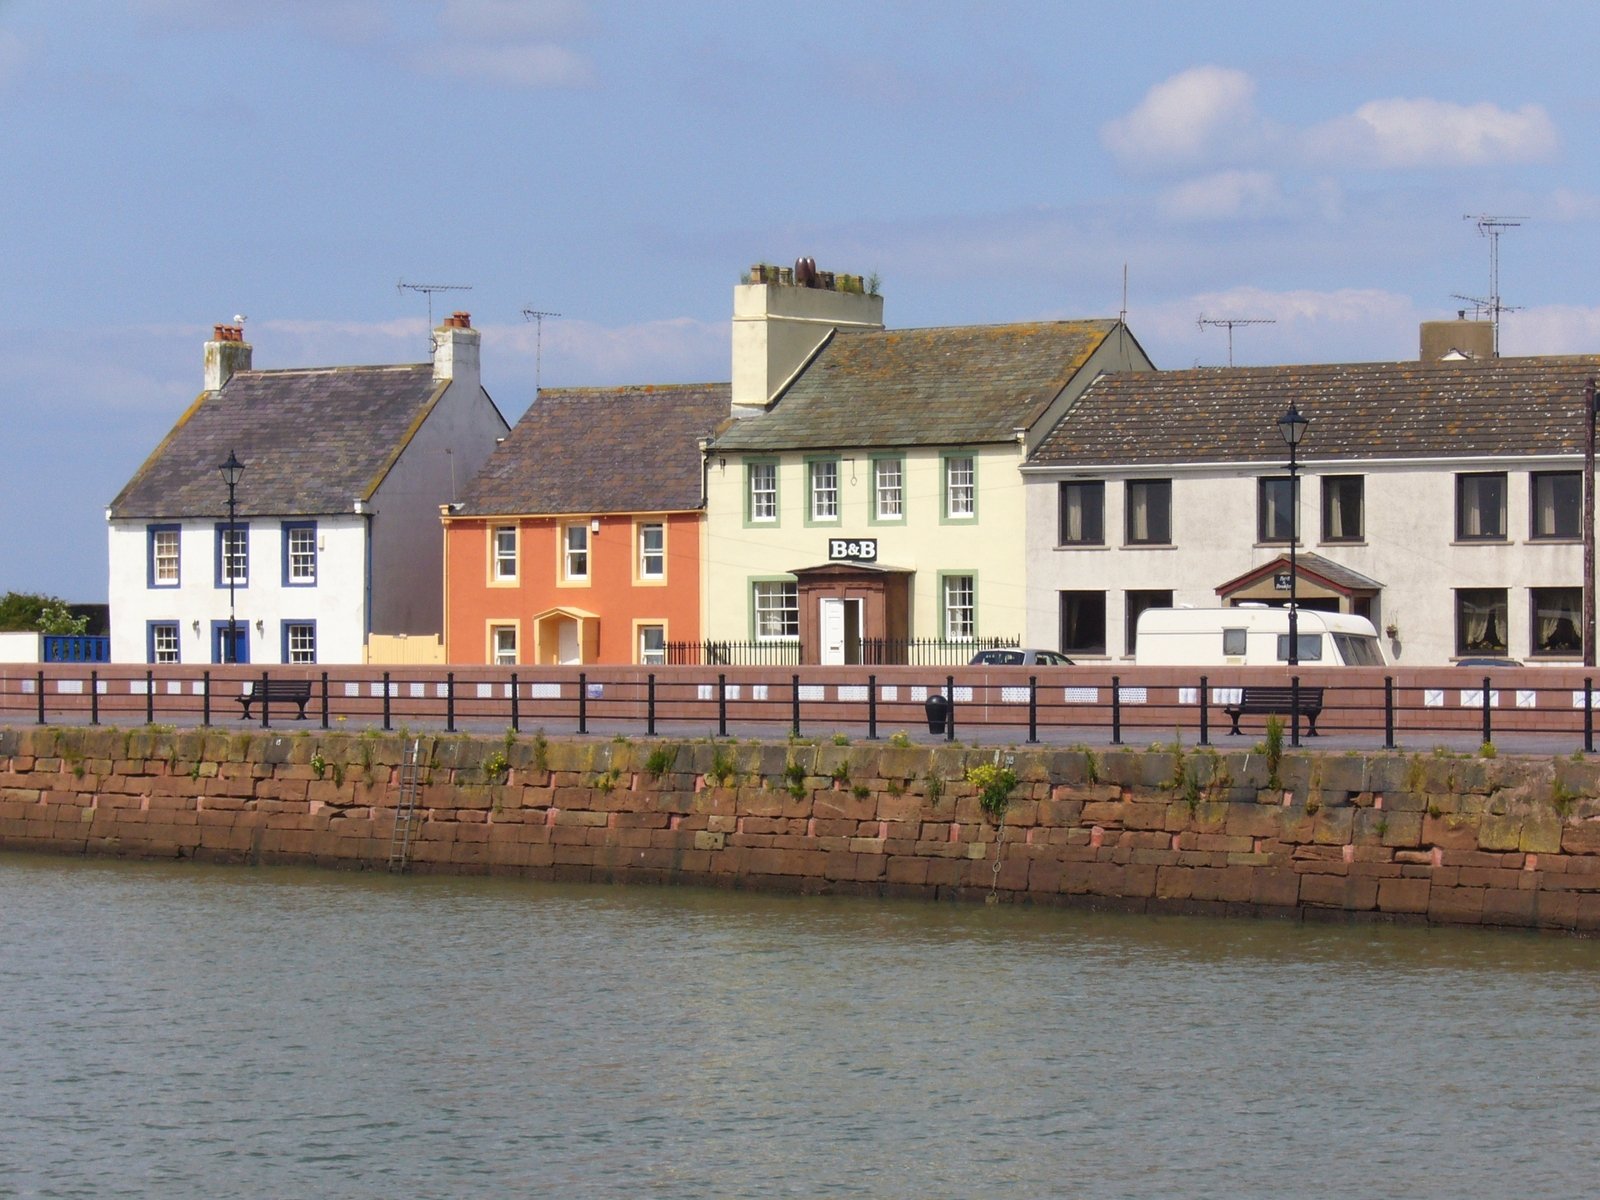 a row of houses near a body of water